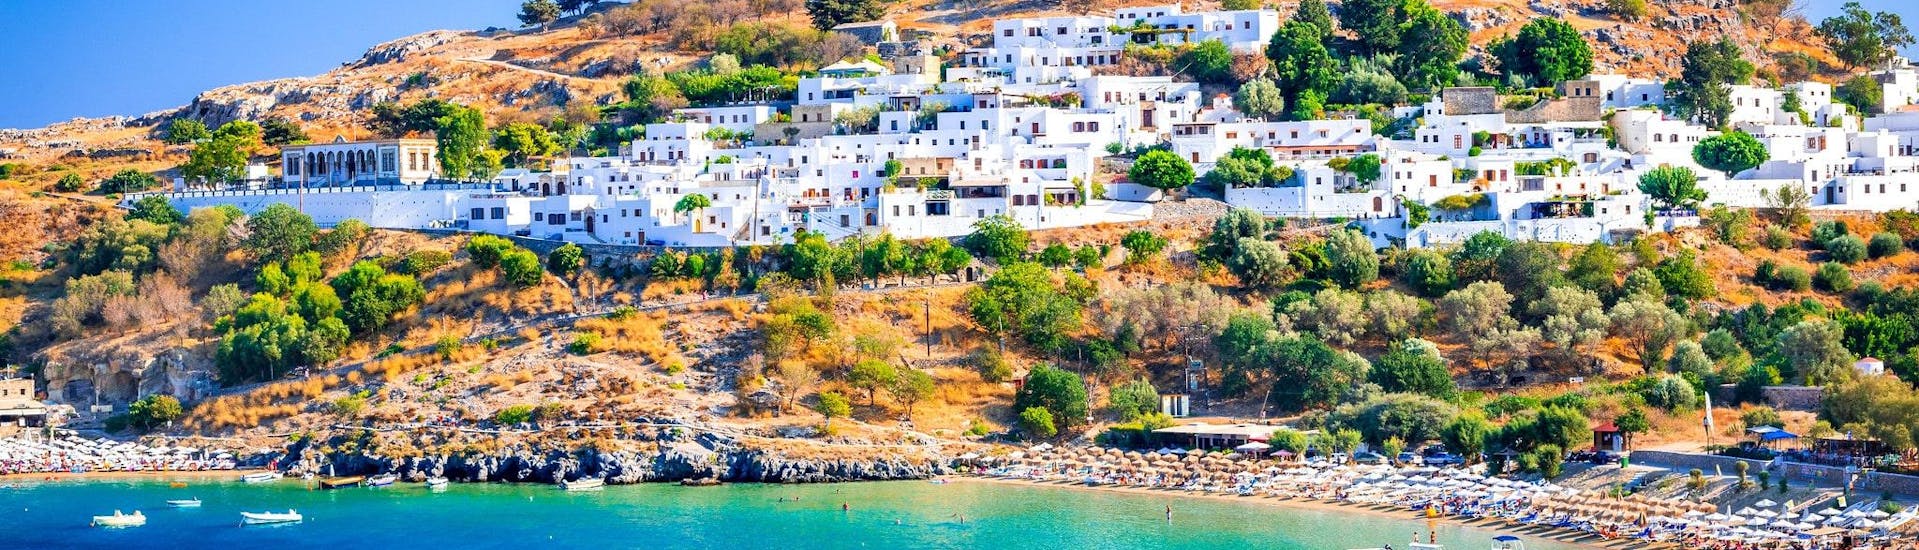 The village Lindos, which is a destination for many boat trips from Kallithea.